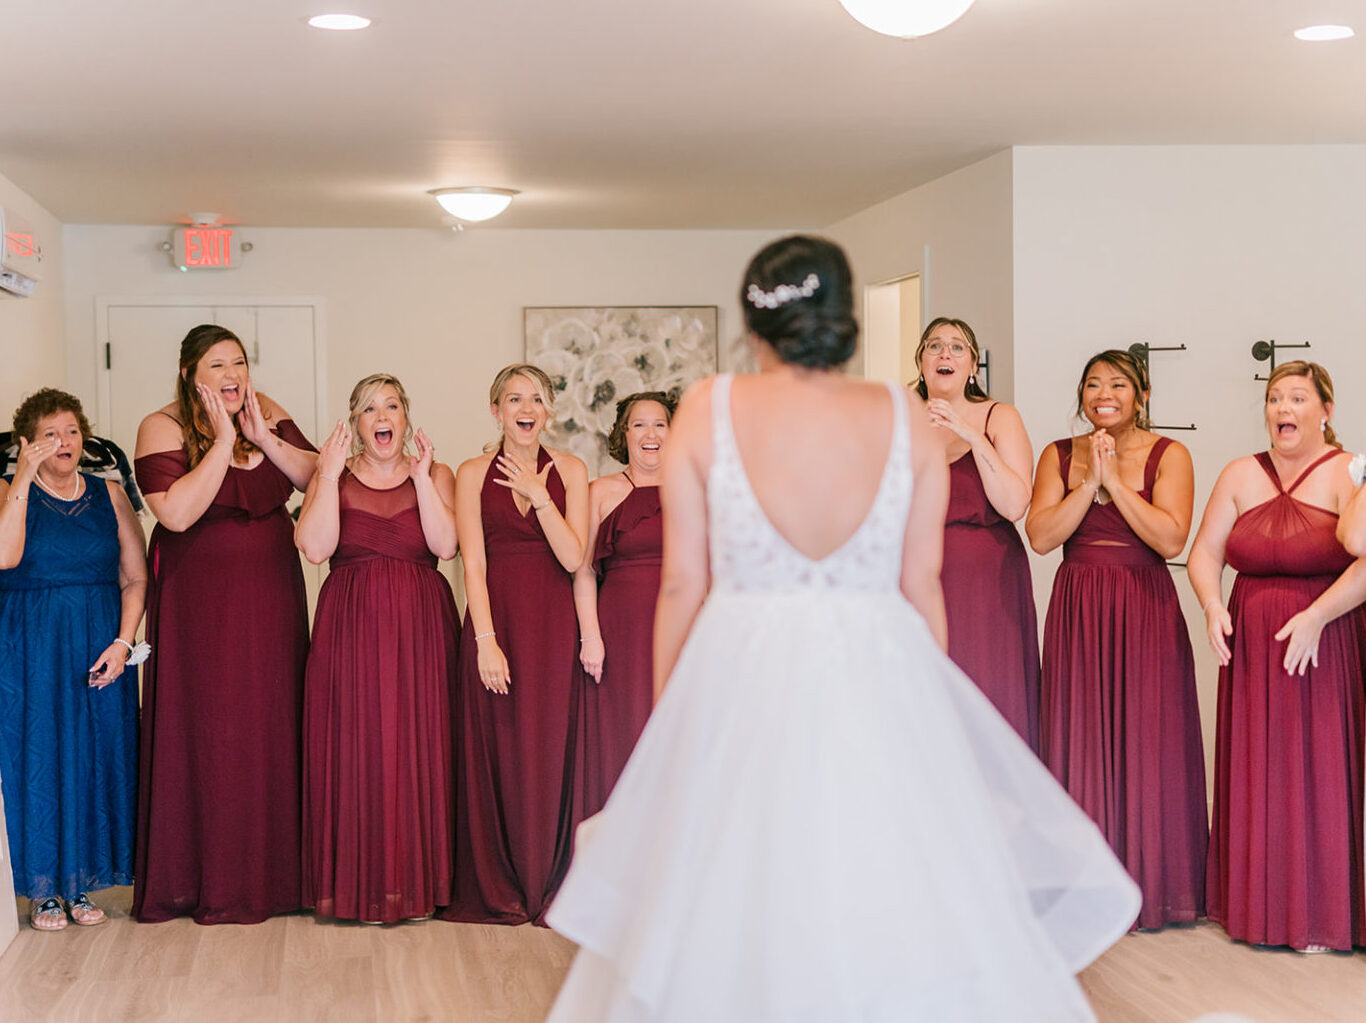 excited bridesmaids and close relatives and friends seeing bride in wedding gown